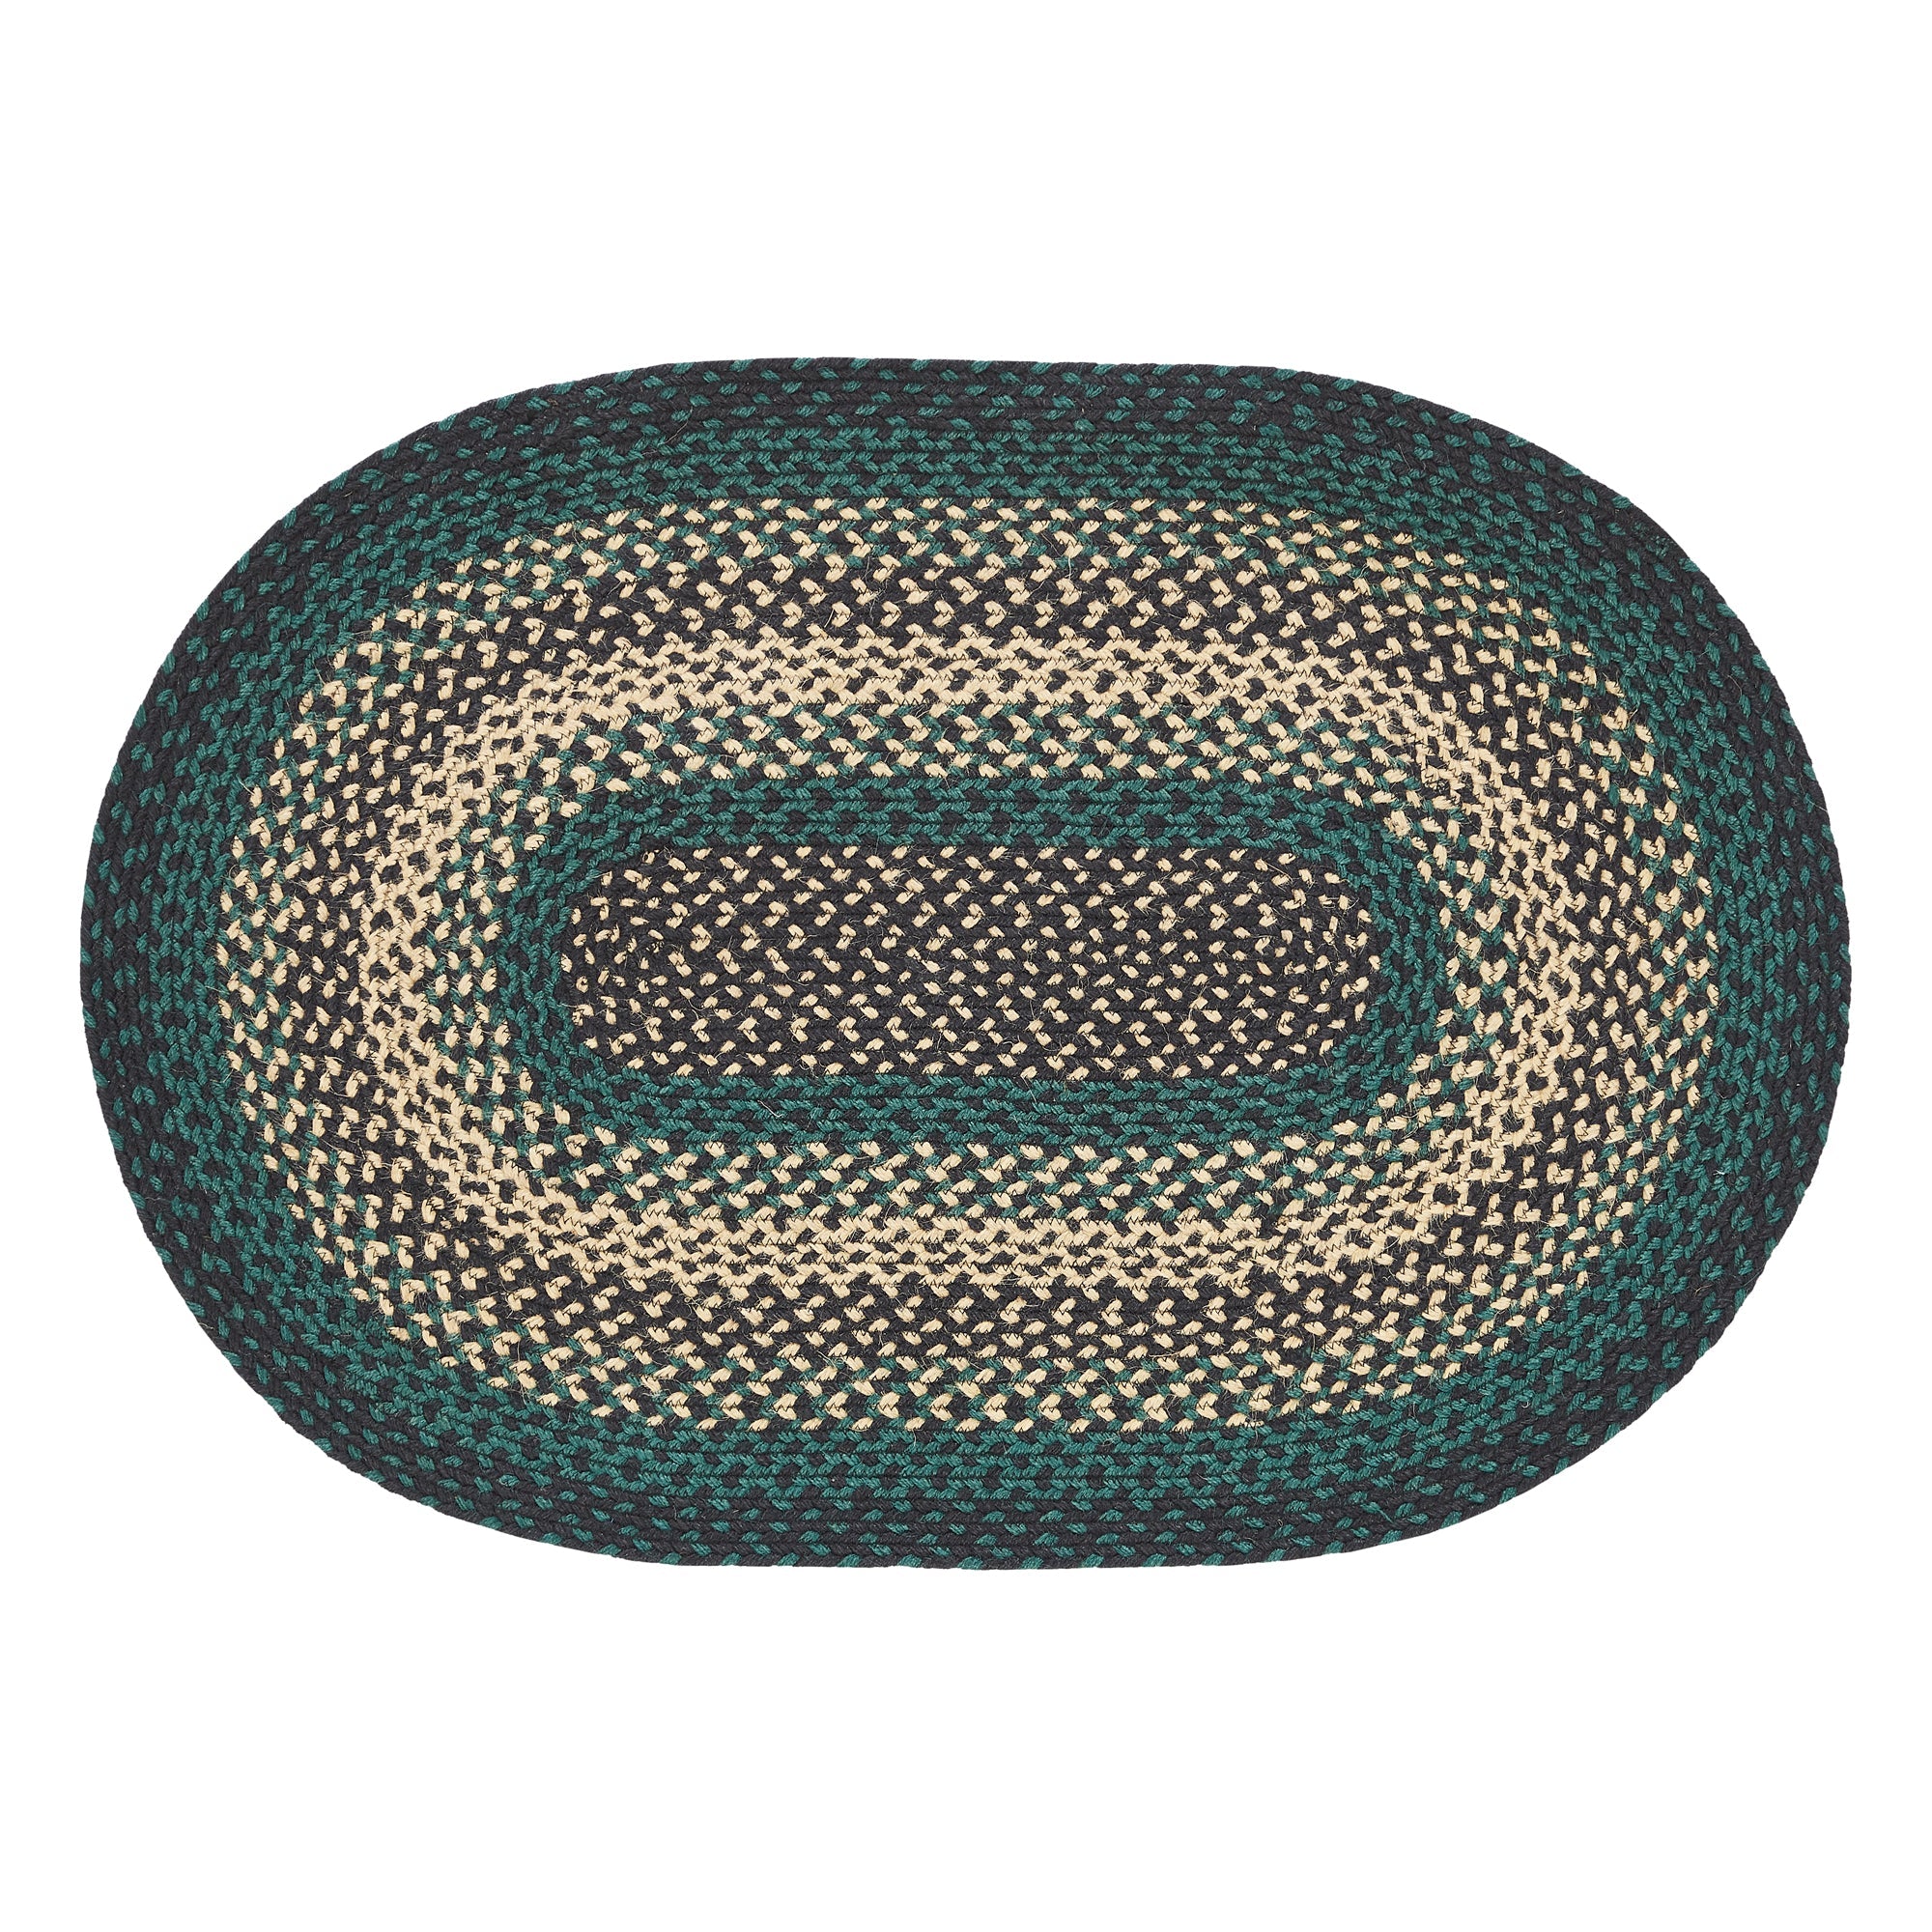 Pine Grove Jute Braided Rug Oval with Rug Pad 2'x3' VHC Brands